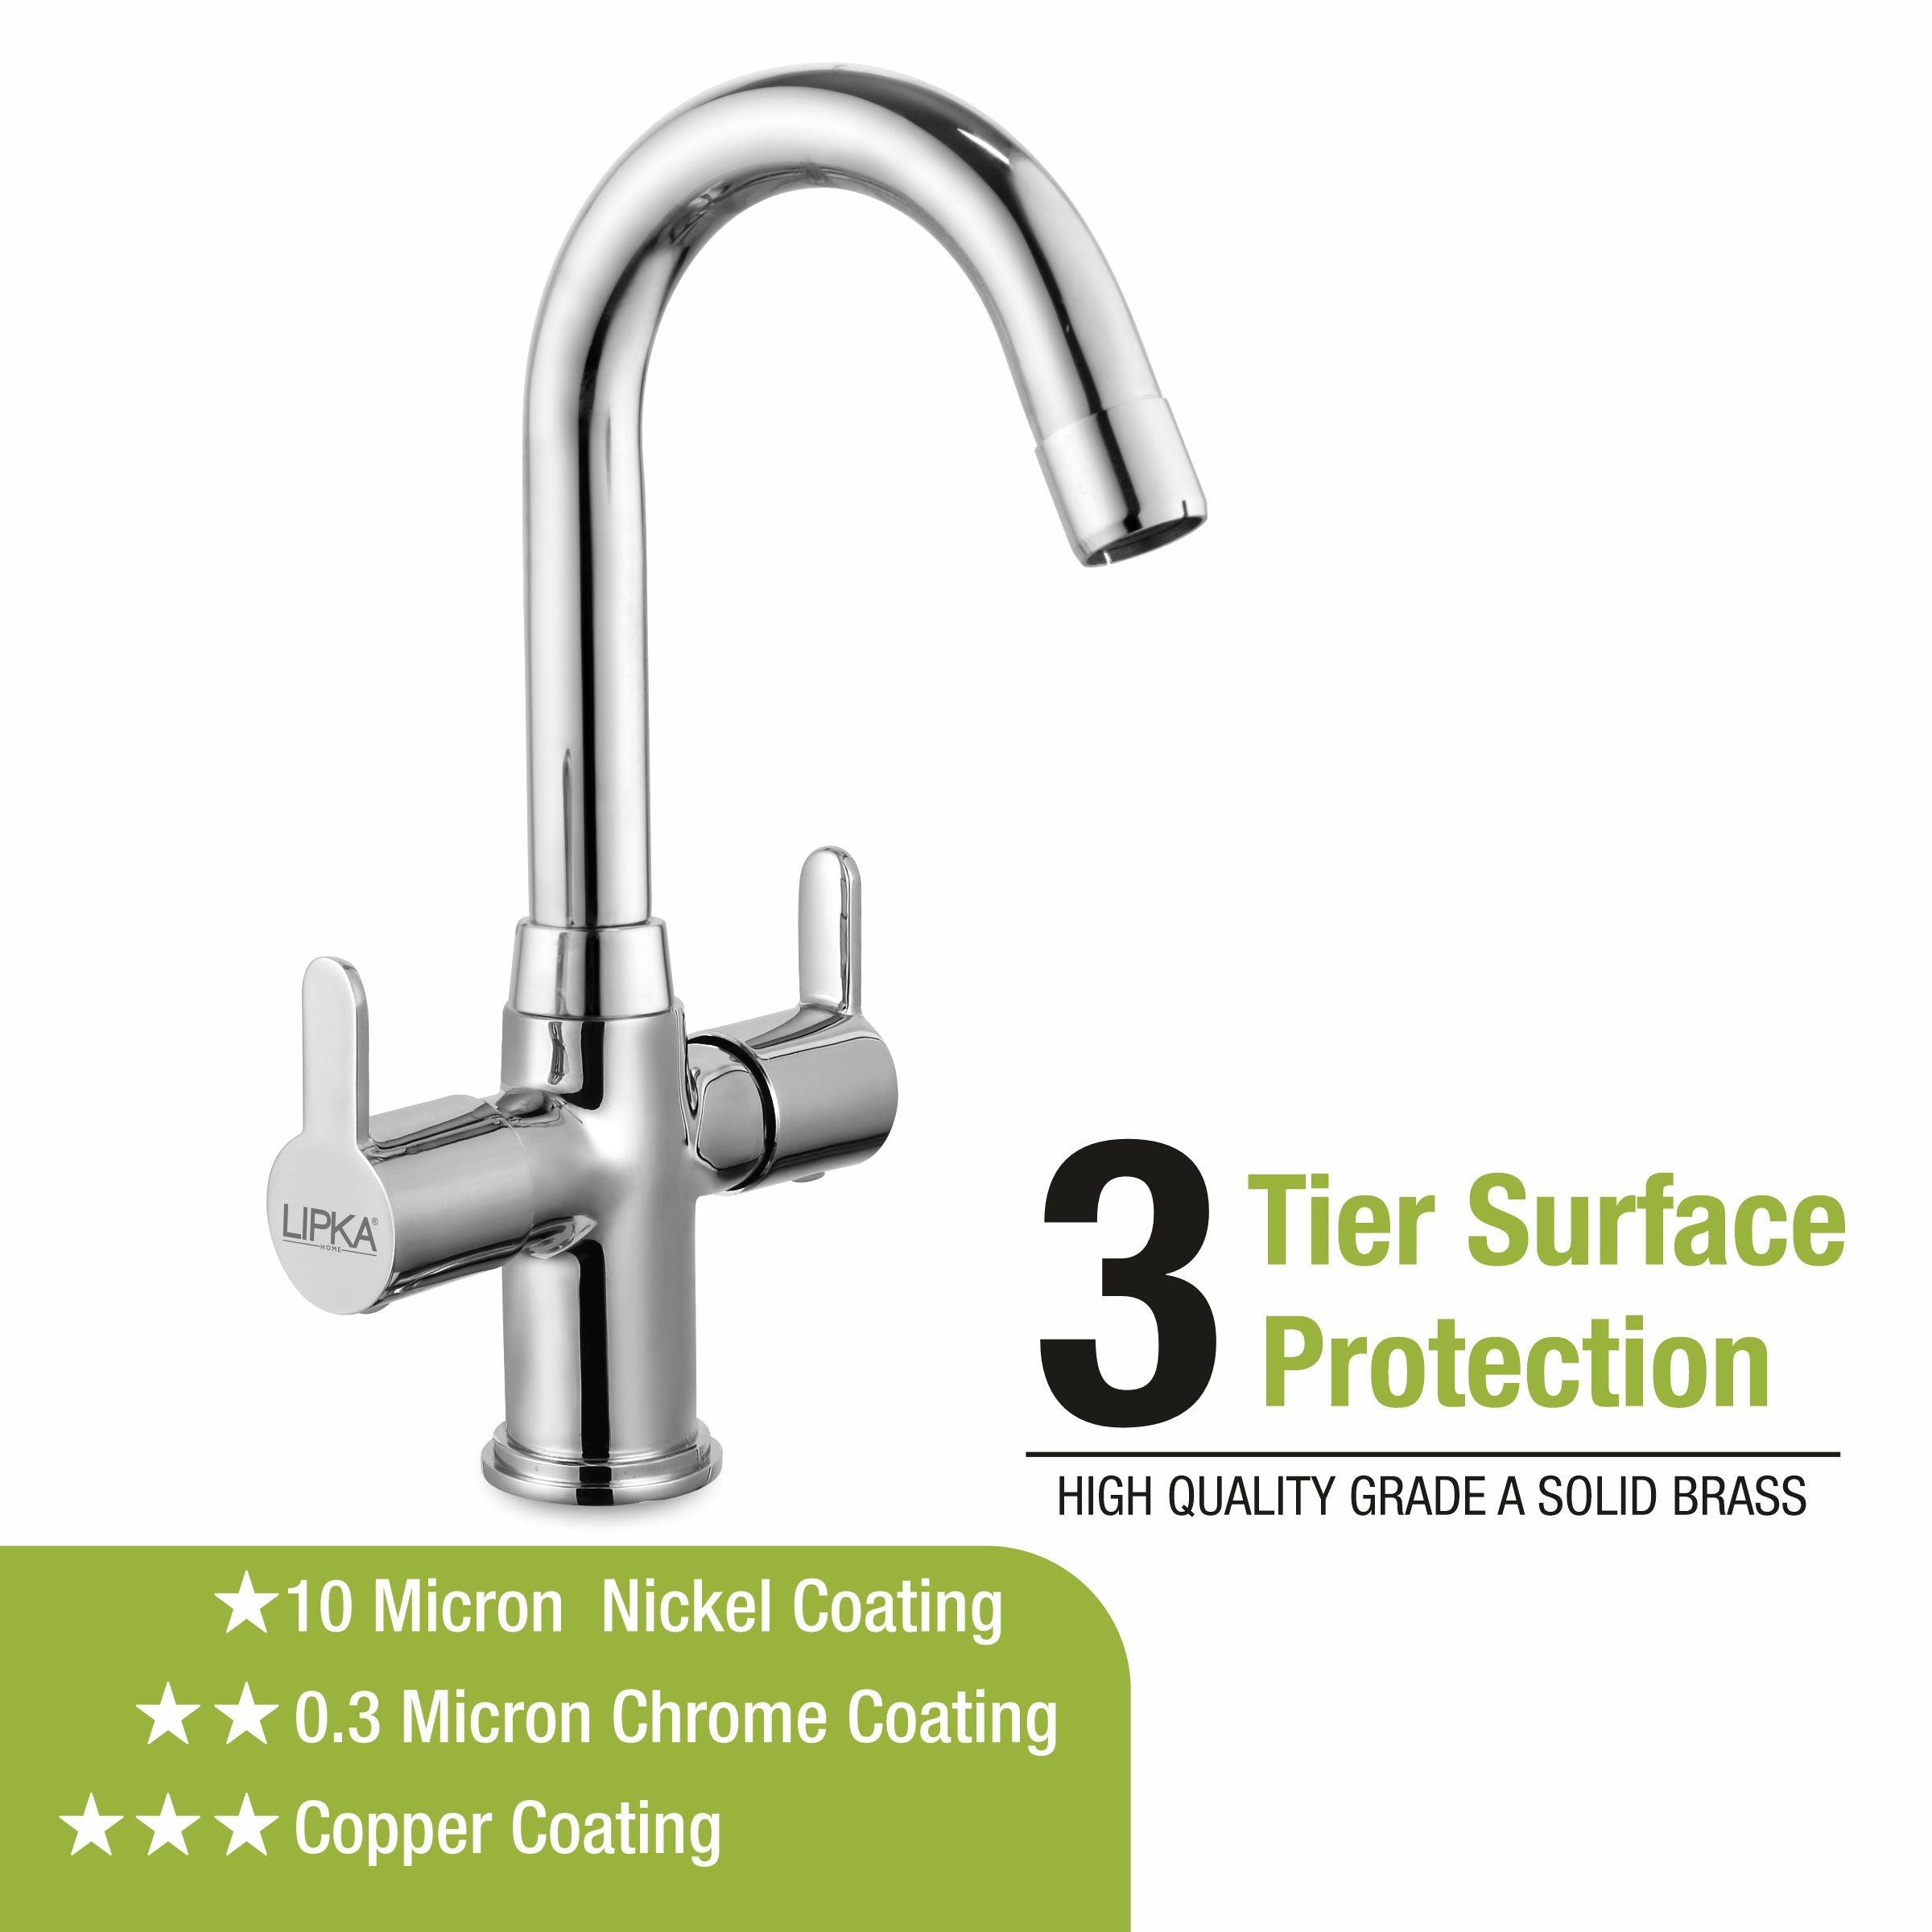 Fusion Centre Hole Basin Mixer Brass Faucet with Round Swivel Spout (12 Inches) - LIPKA - Lipka Home